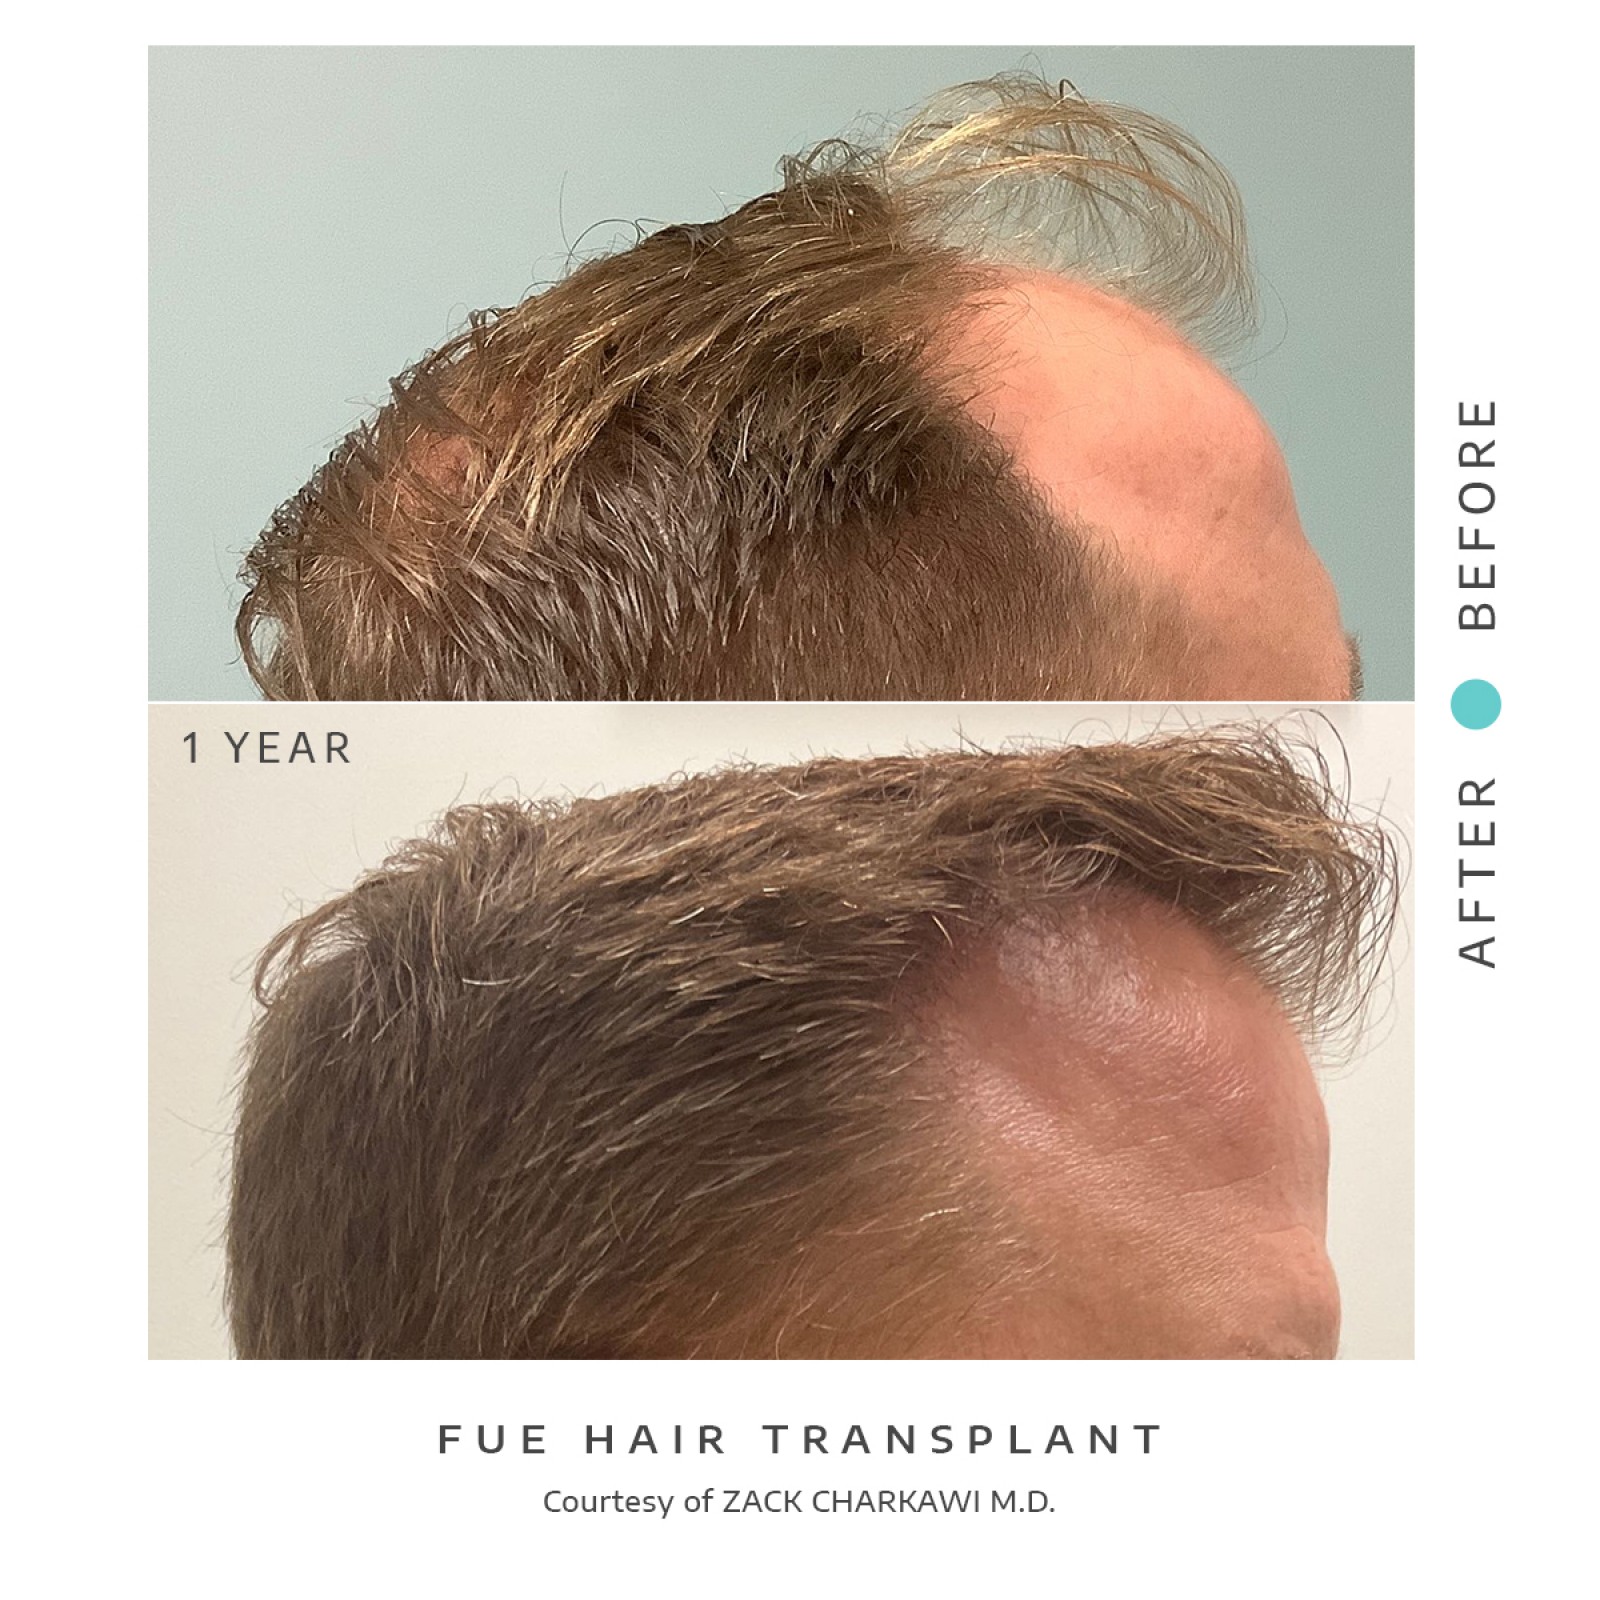 The before image shows balding and thinning hair with visible scalp patches. The after image shows a successful fue hair transplant with the scalp now covered in dense, natural-looking hair.